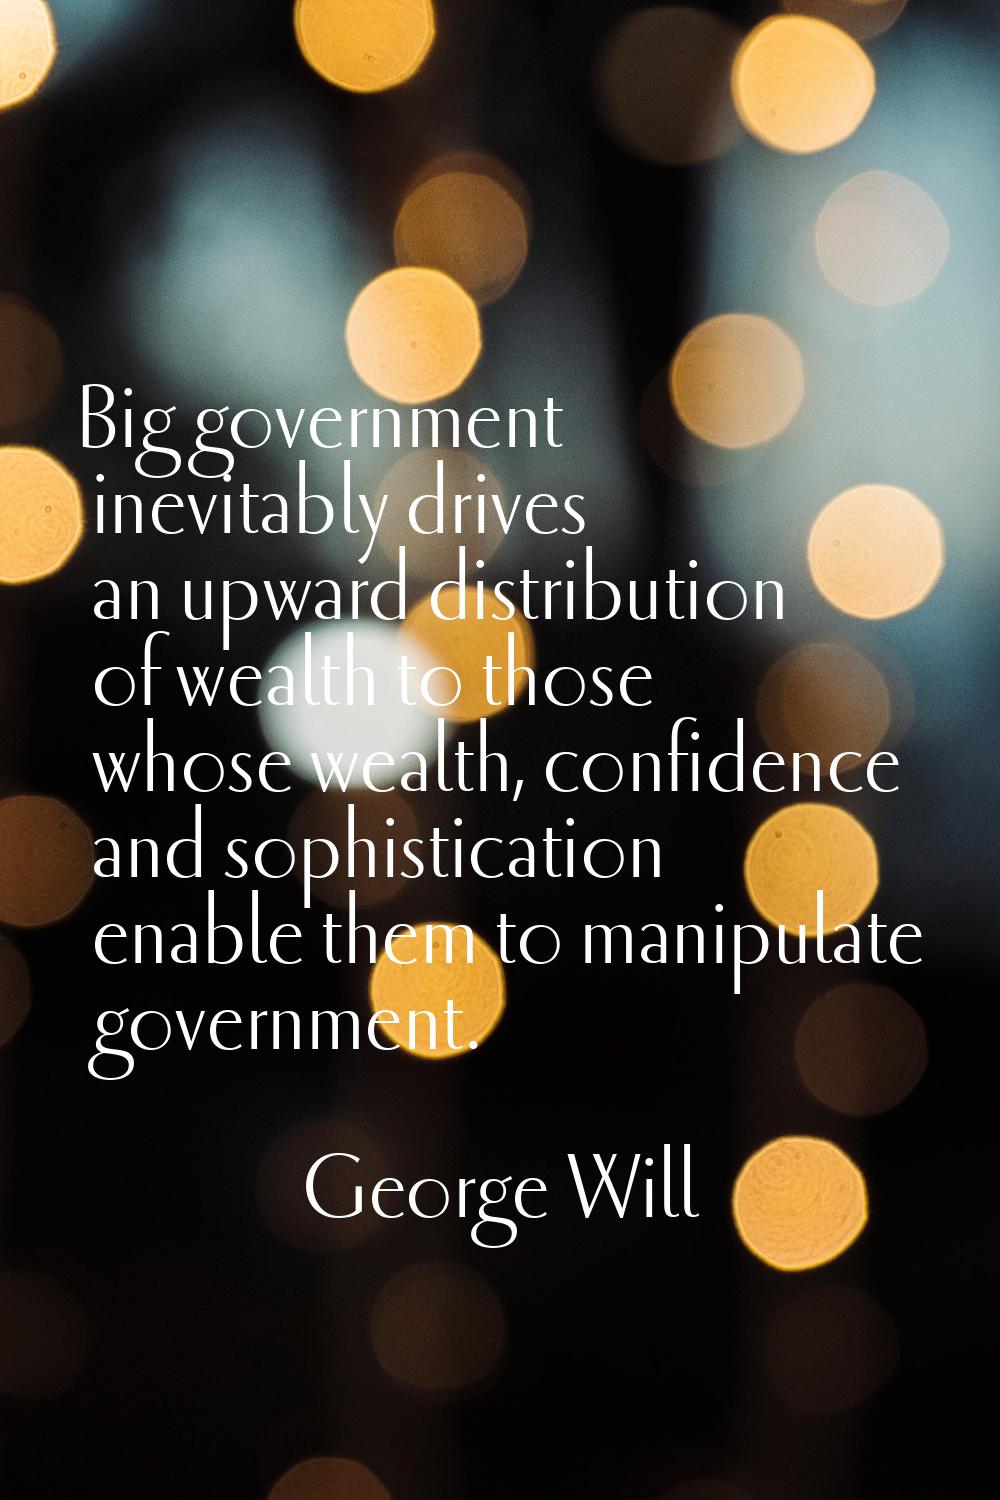 Big government inevitably drives an upward distribution of wealth to those whose wealth, confidence